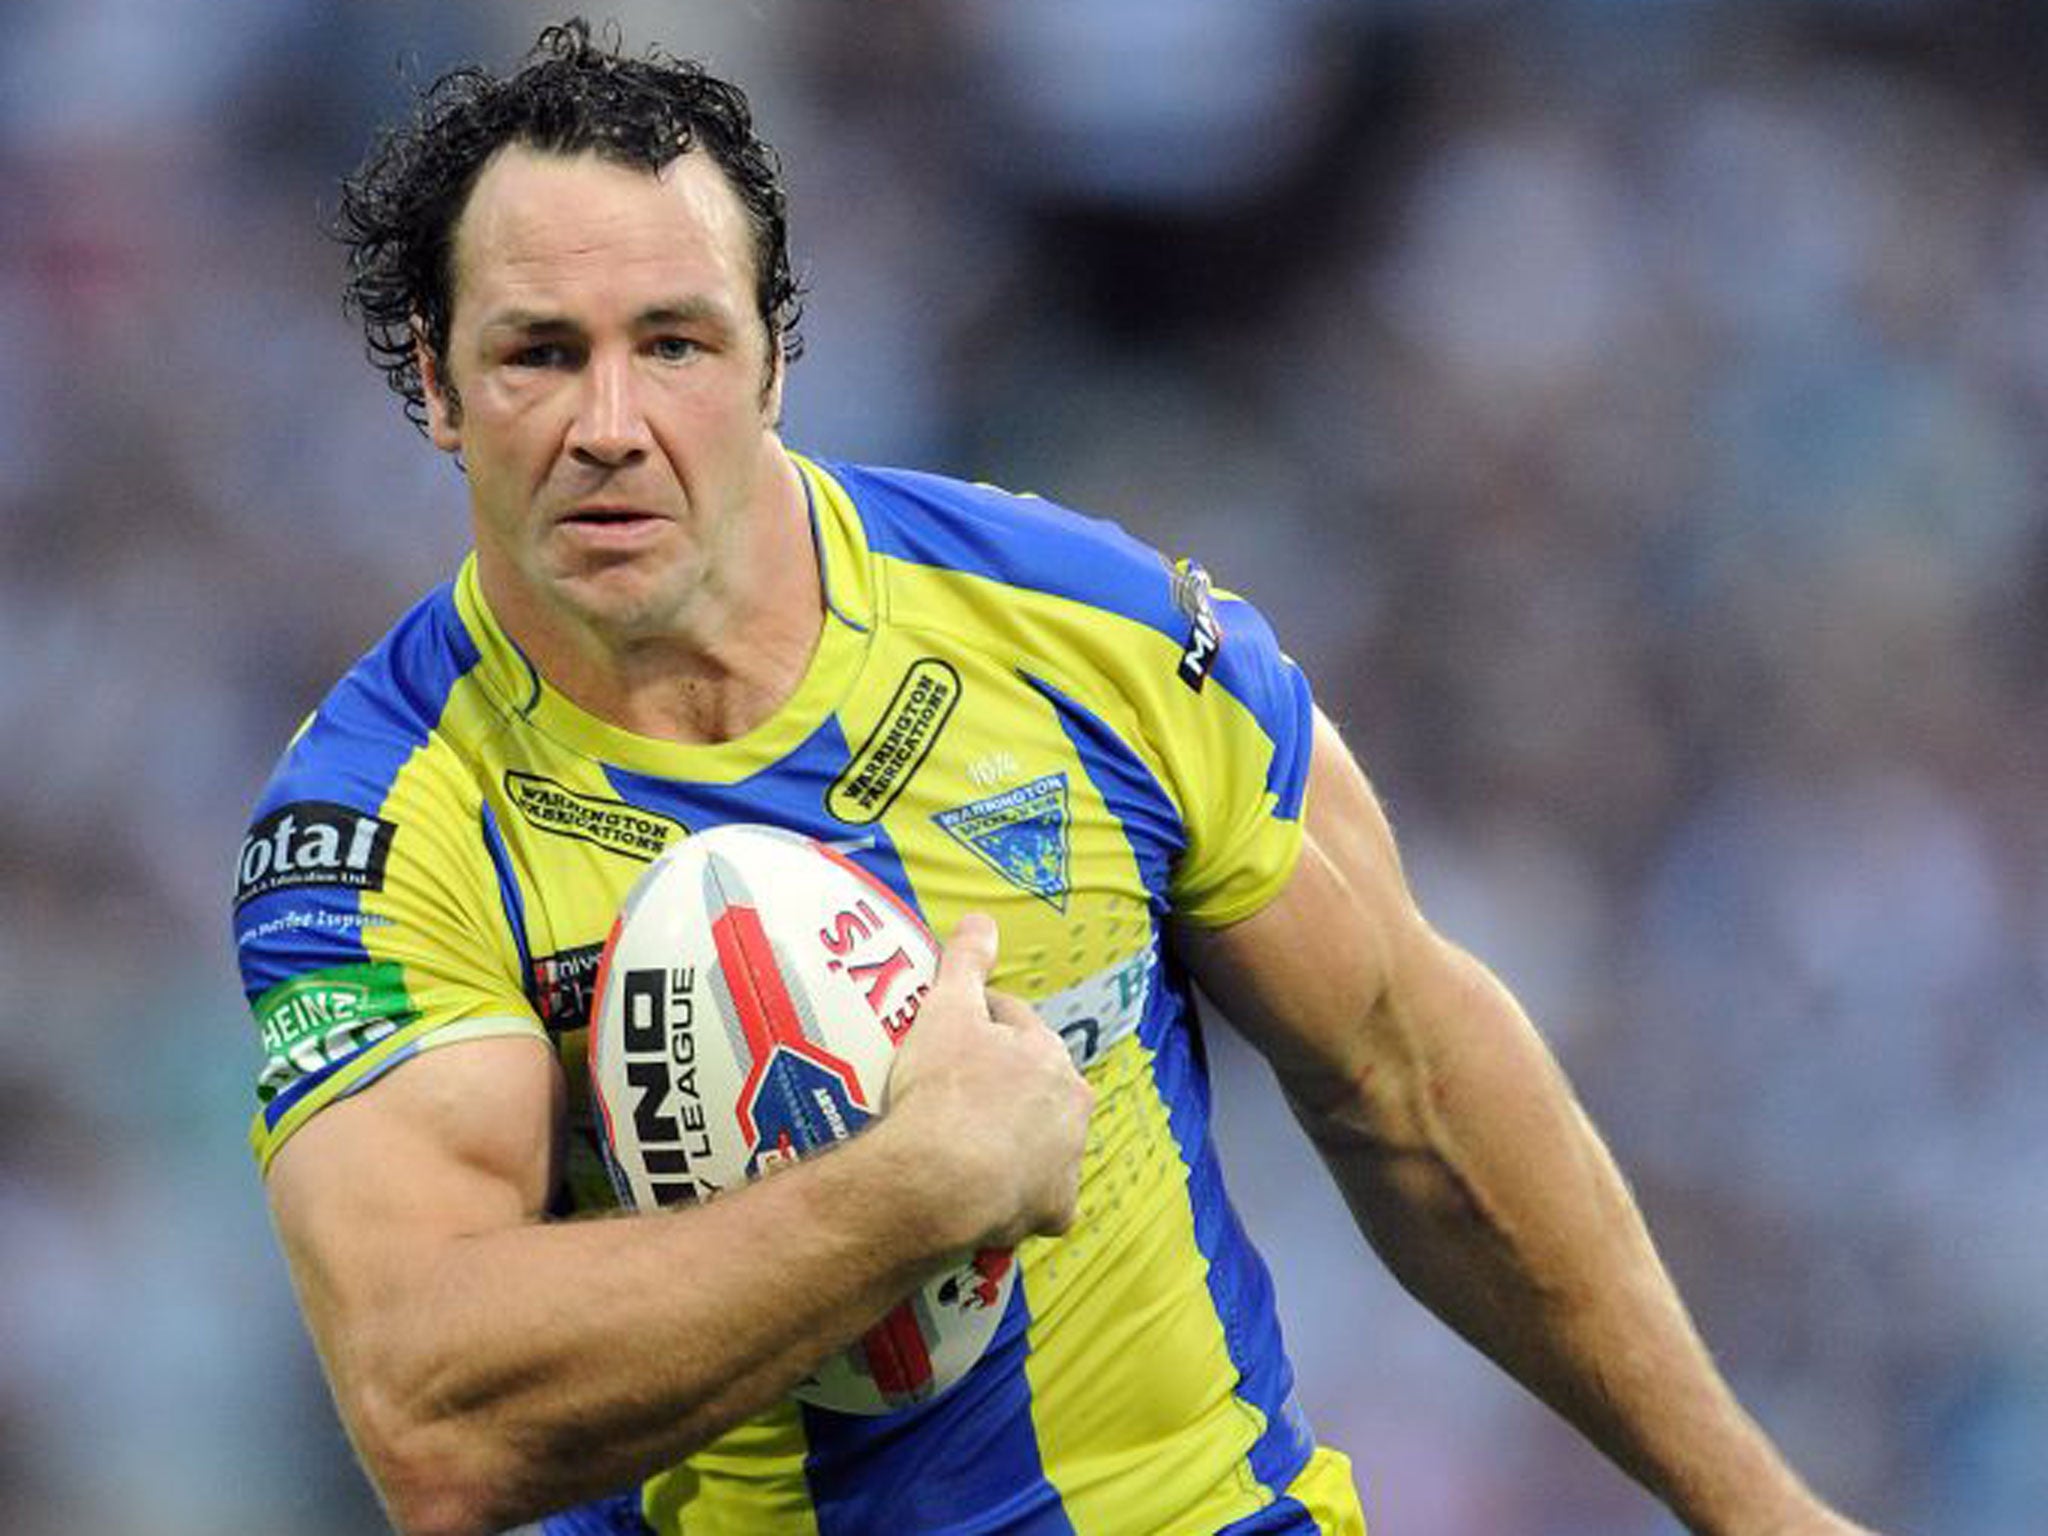 Adrian Morley, the Warrington captain faces his former side Leeds on Saturday night in the play-offs